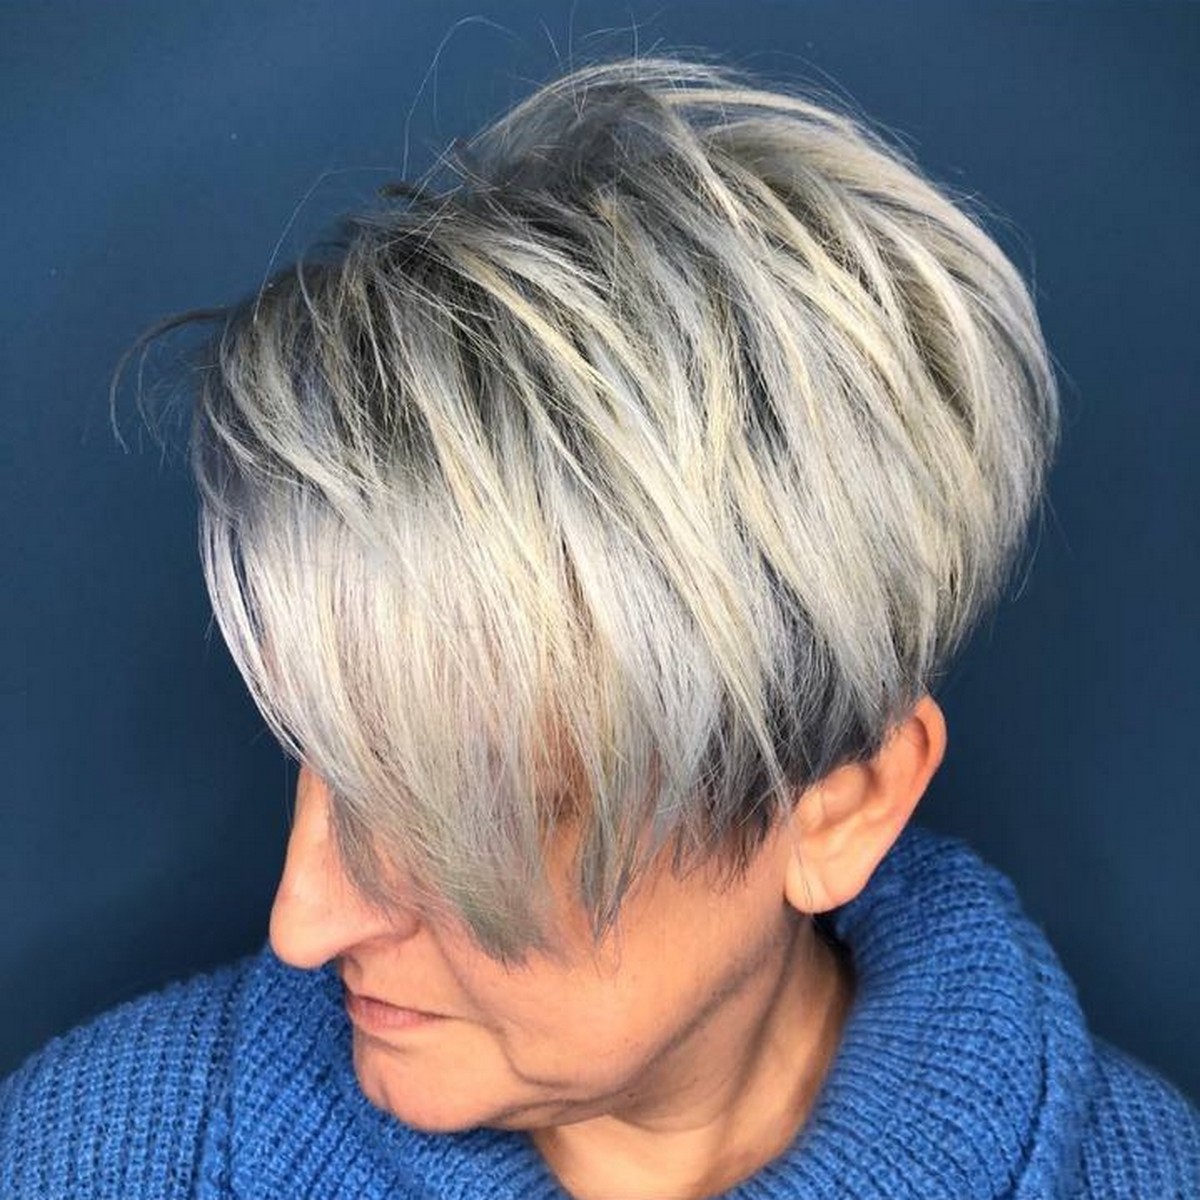 Piece-y Long Pixie Cut With Angled Layers